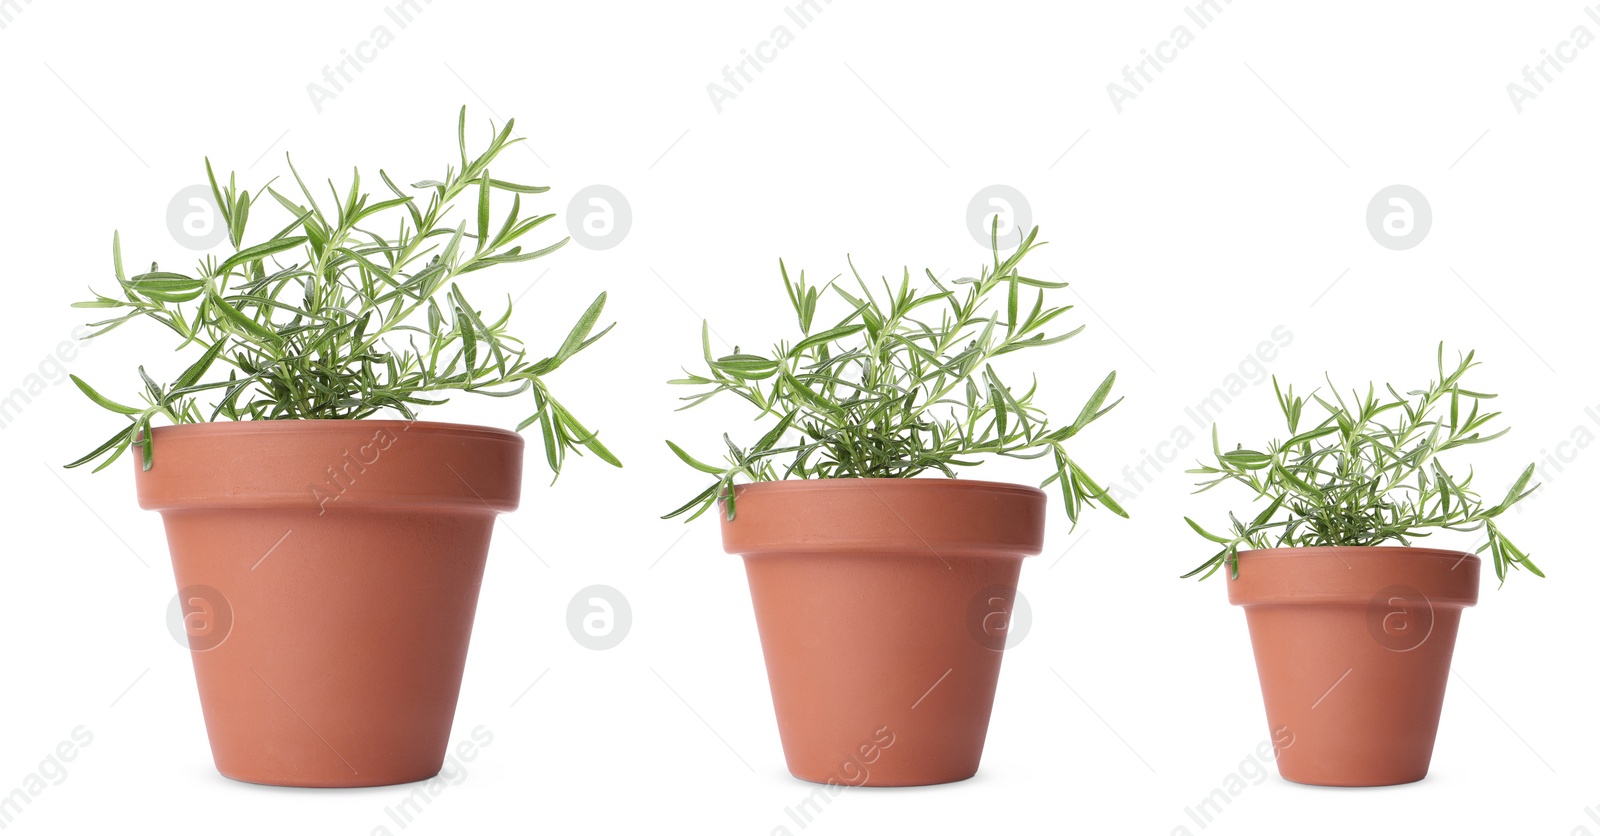 Image of Rosemary growing in pots isolated on white, different sizes